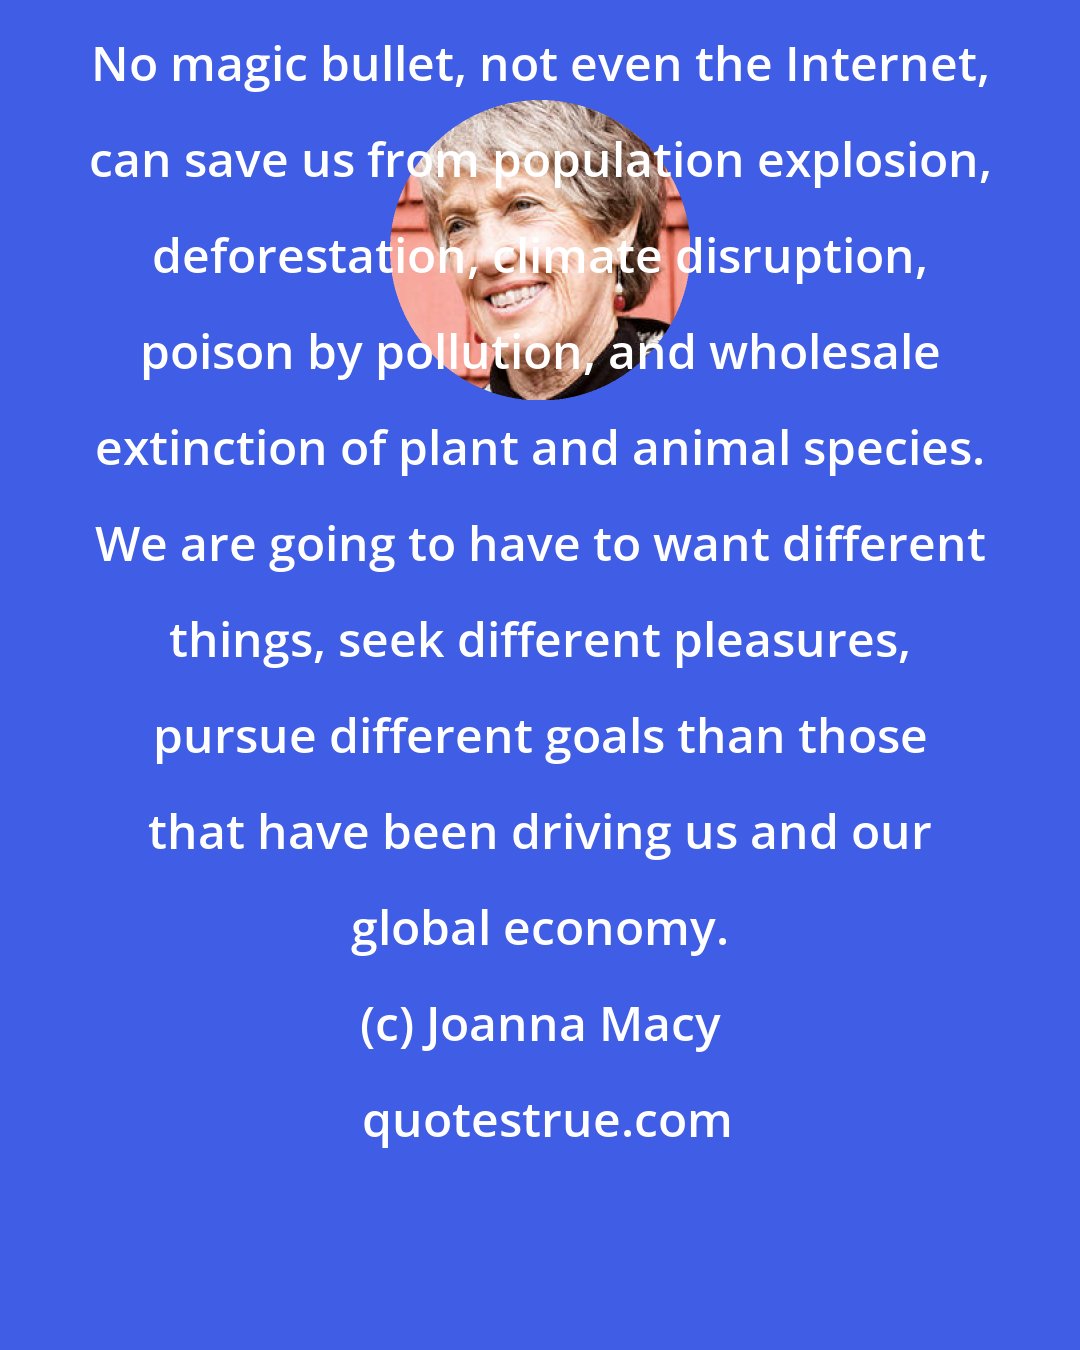 Joanna Macy: No magic bullet, not even the Internet, can save us from population explosion, deforestation, climate disruption, poison by pollution, and wholesale extinction of plant and animal species. We are going to have to want different things, seek different pleasures, pursue different goals than those that have been driving us and our global economy.